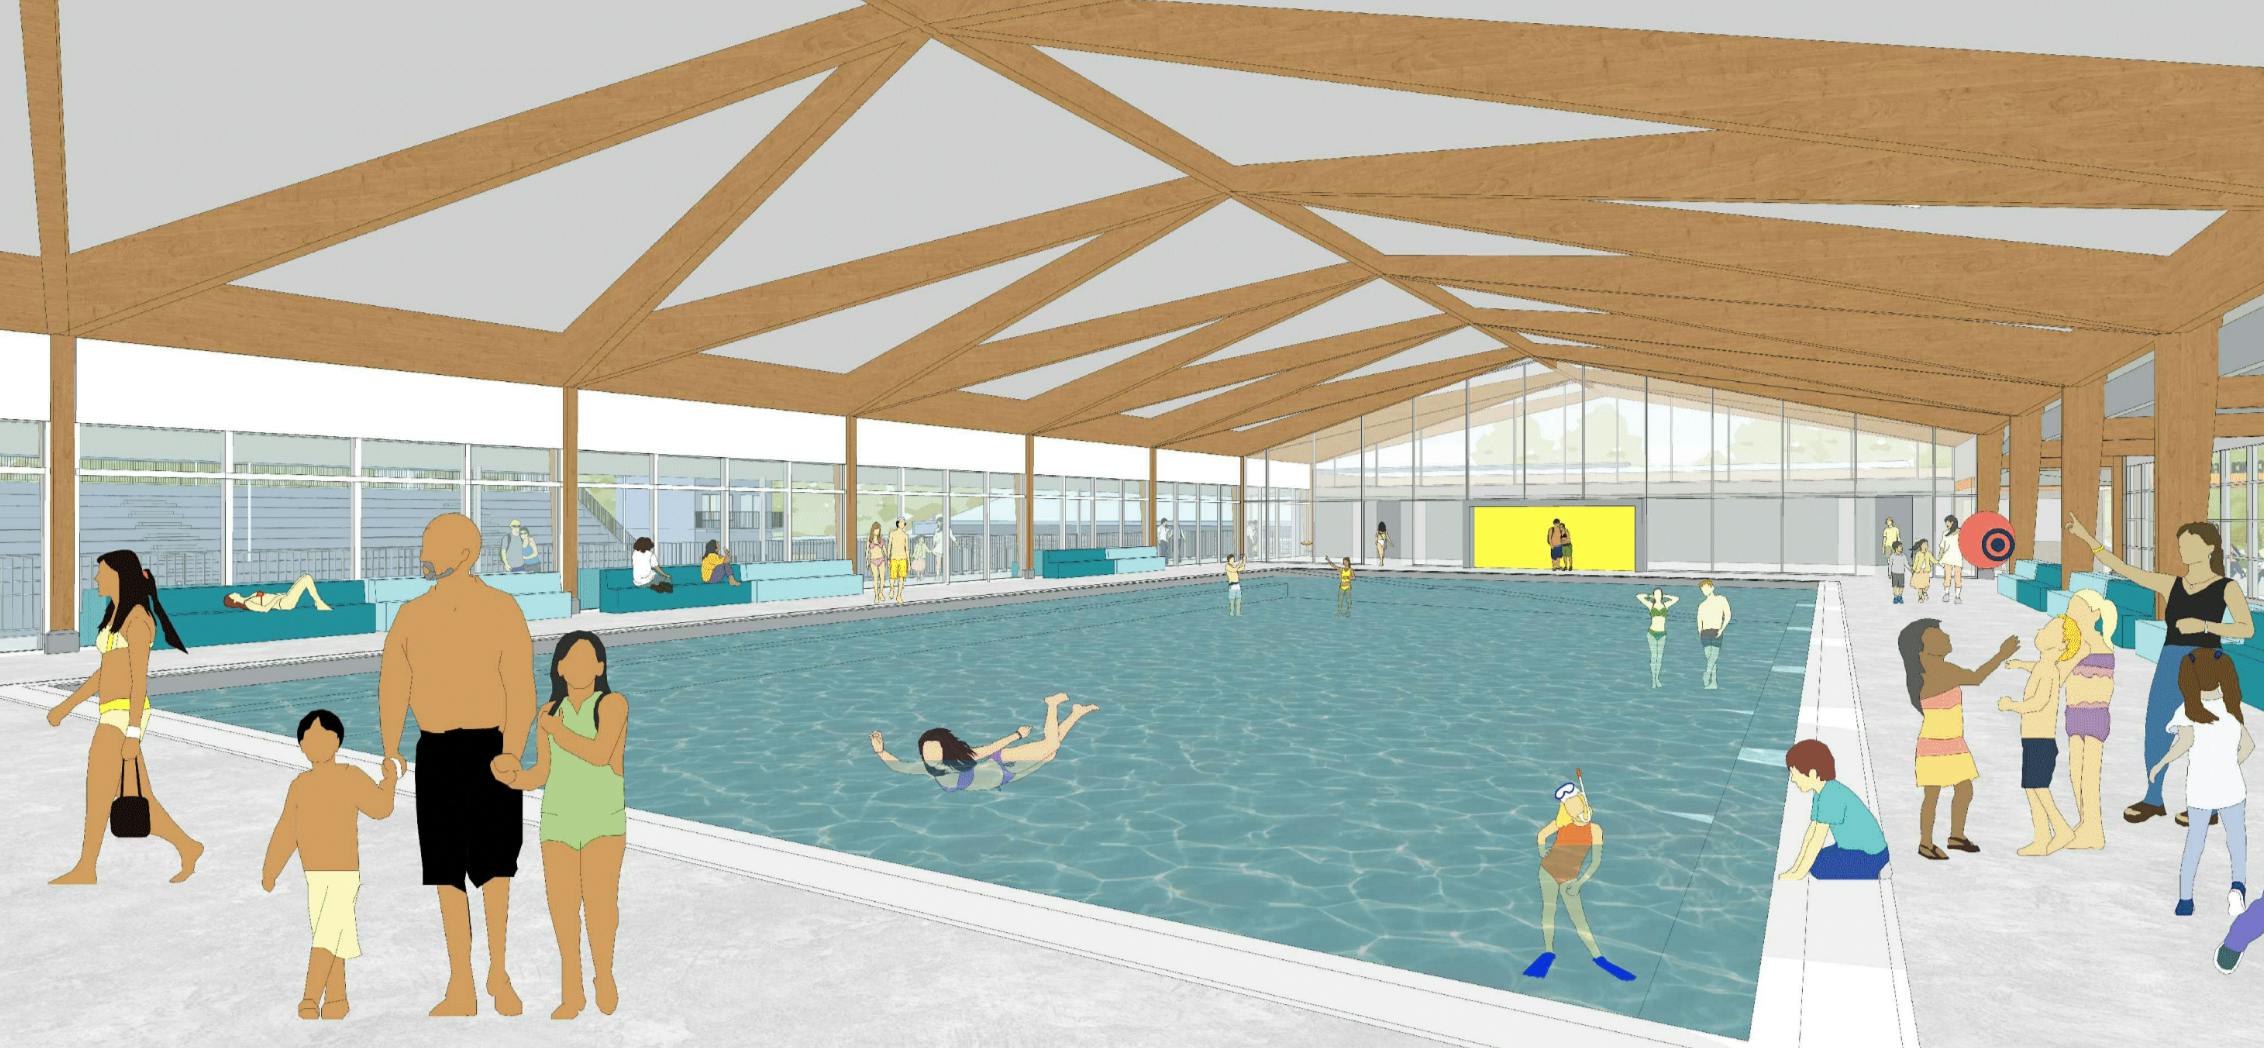 Inside view of proposed new pool  (Concept design) 